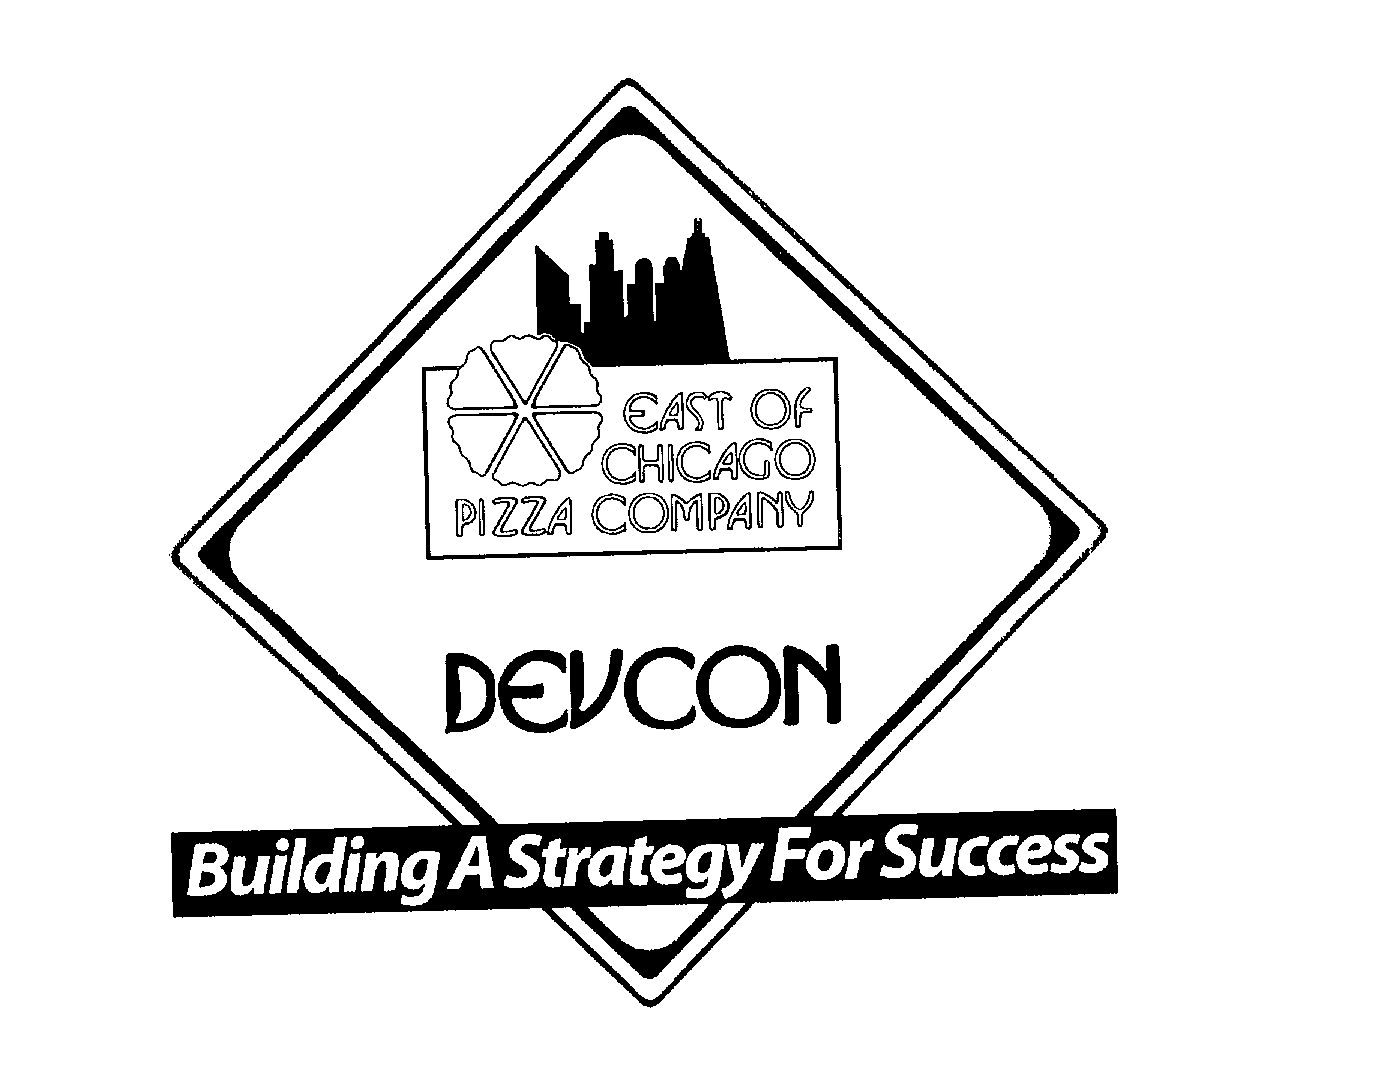 Trademark Logo EAST OF CHICAGO PIZZA COMPANY DEVCON BUILDING A STRATEGY FOR SUCCESS